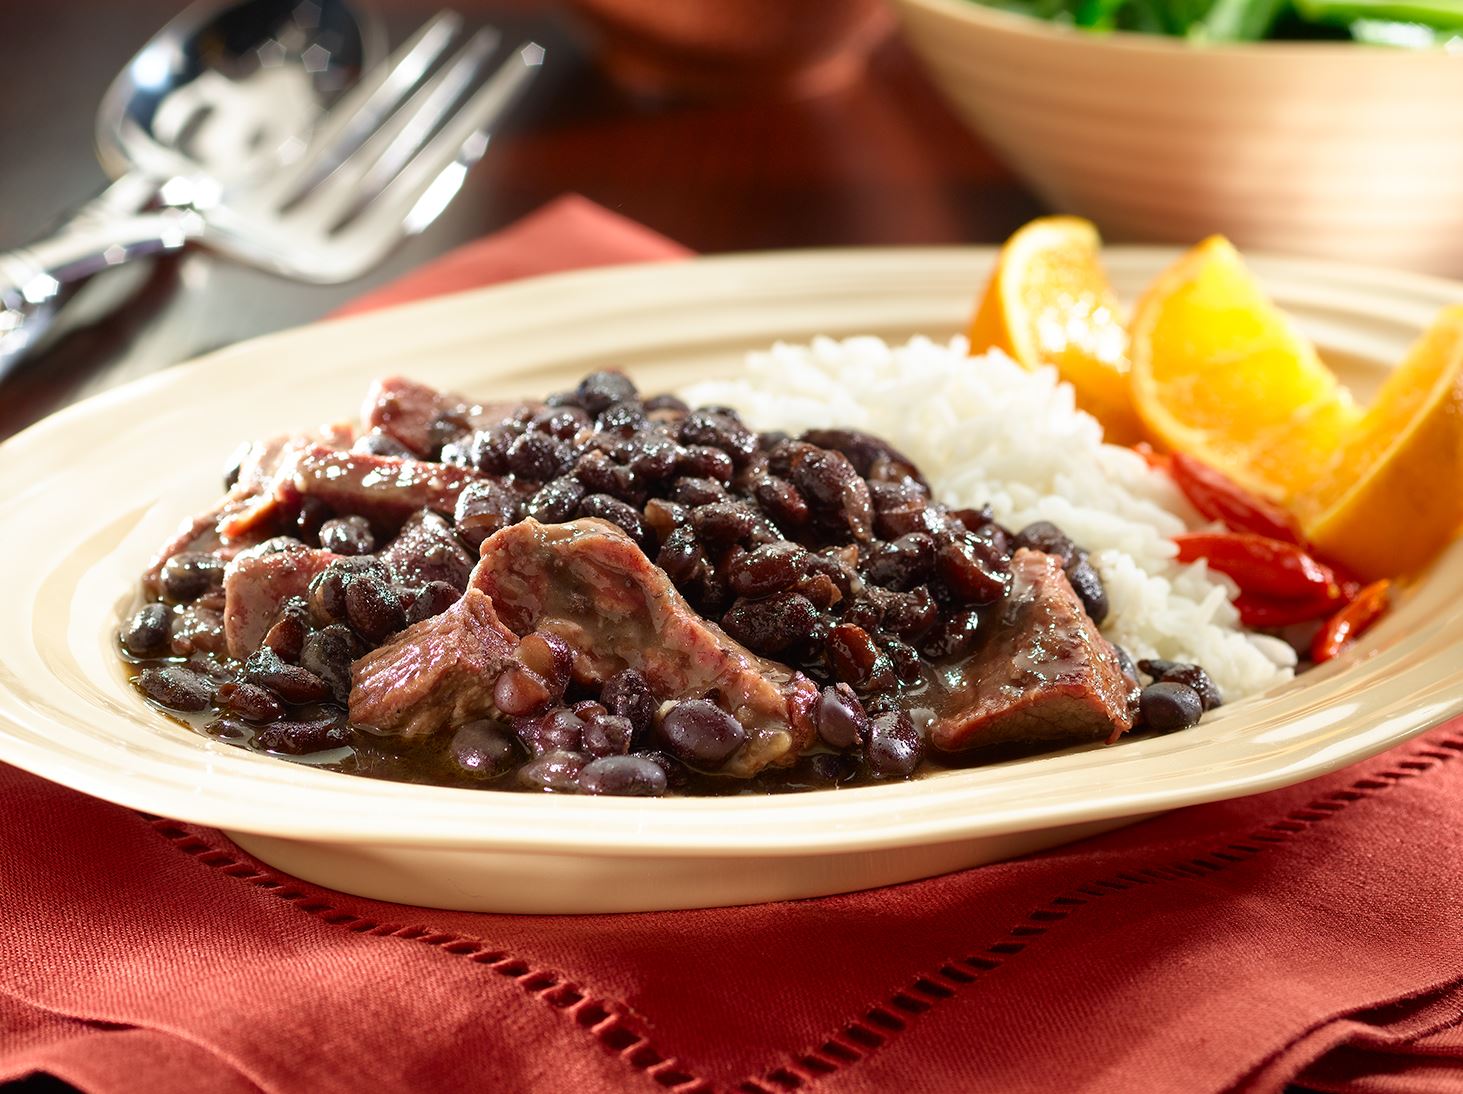 This International Cuisine Test Will Reveal Which Country You Actually Belong in Feijoada